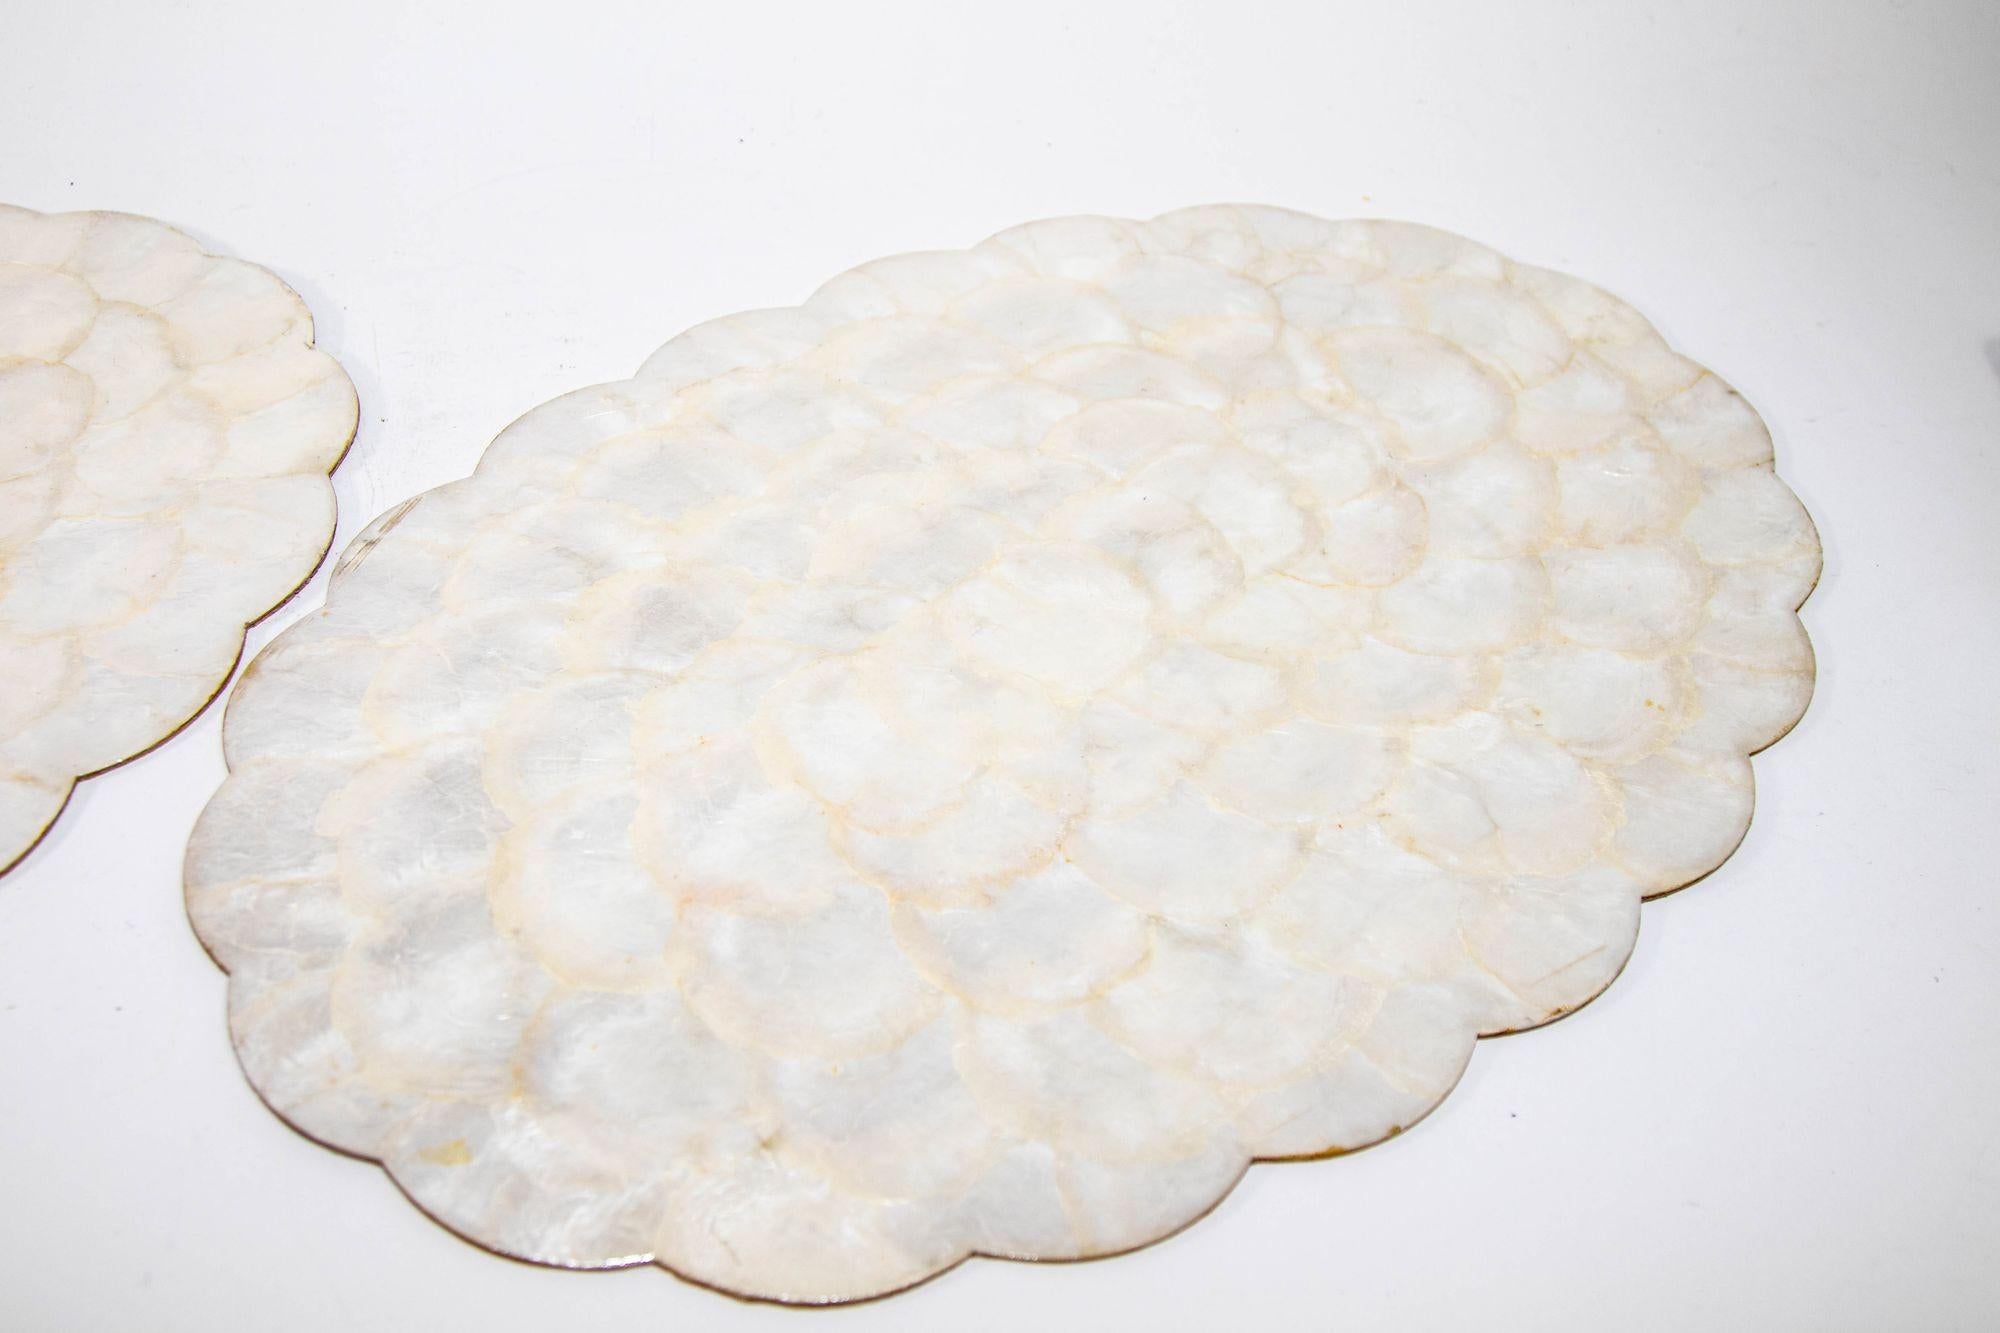 1960s Hallie St Mary 2 Placemats in Natural Capiz Pearl Shell Scalloped Edge 6